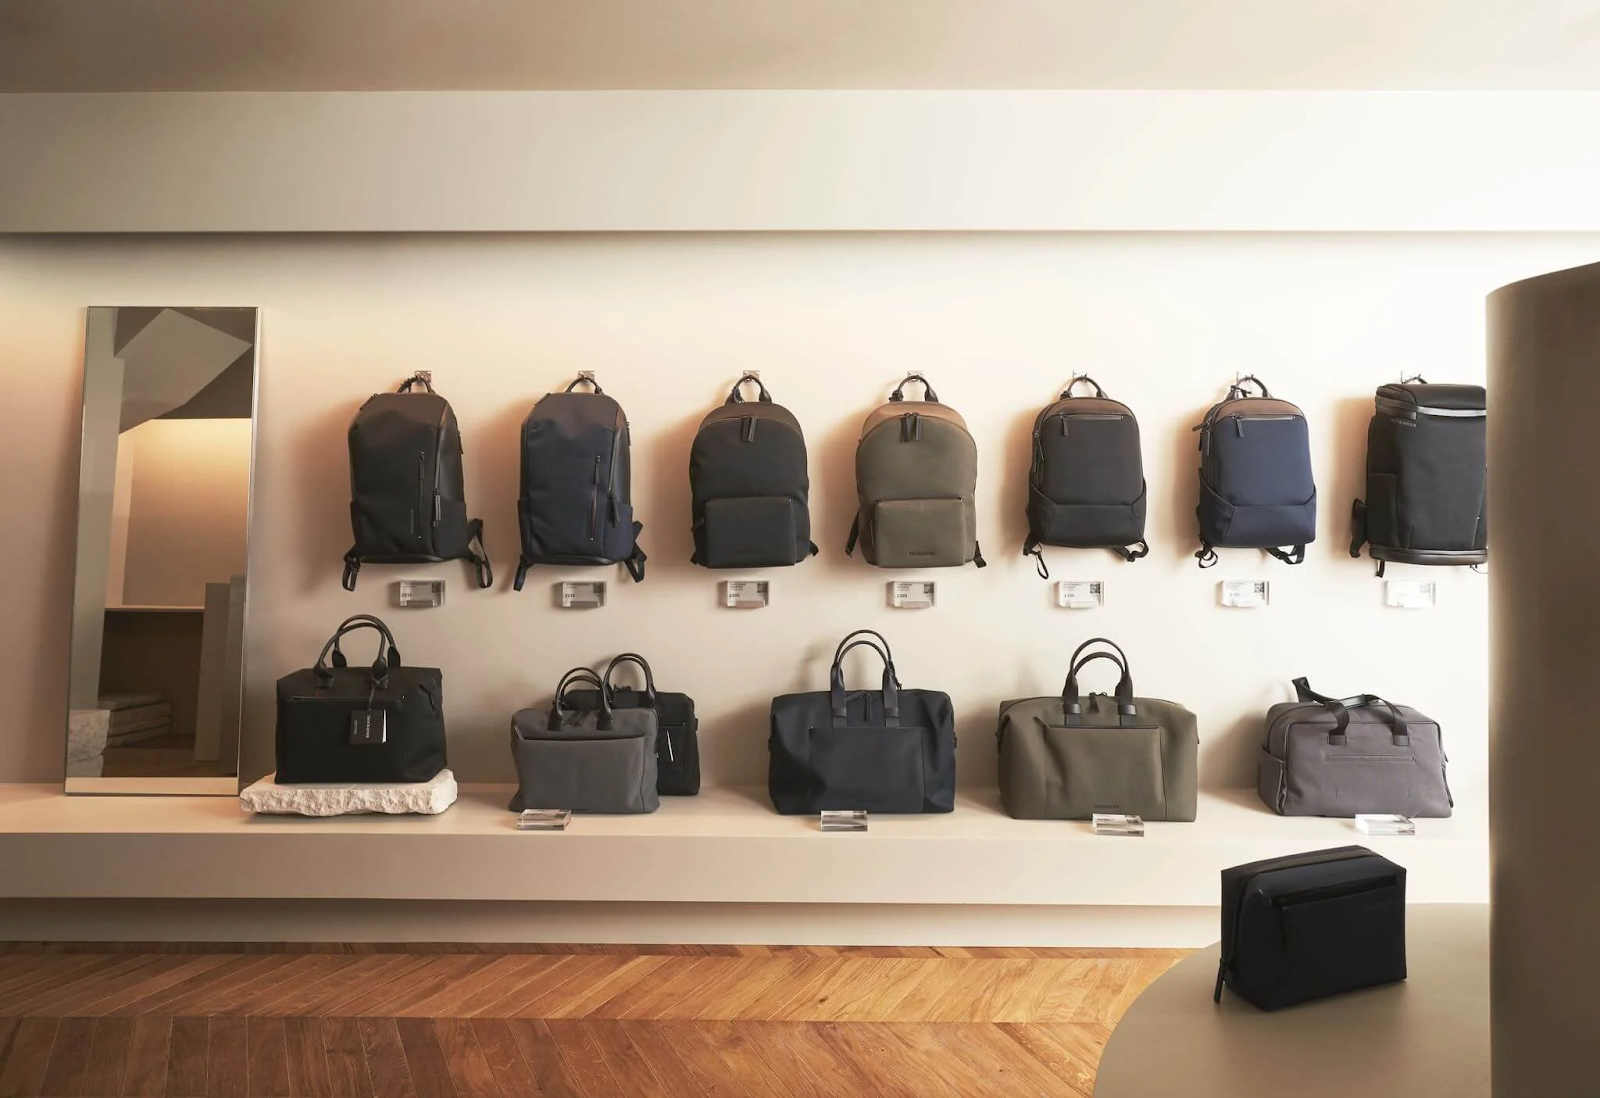 Bag brand Troubadour keeps the focus on its products by hanging backpacks directly on the wall.